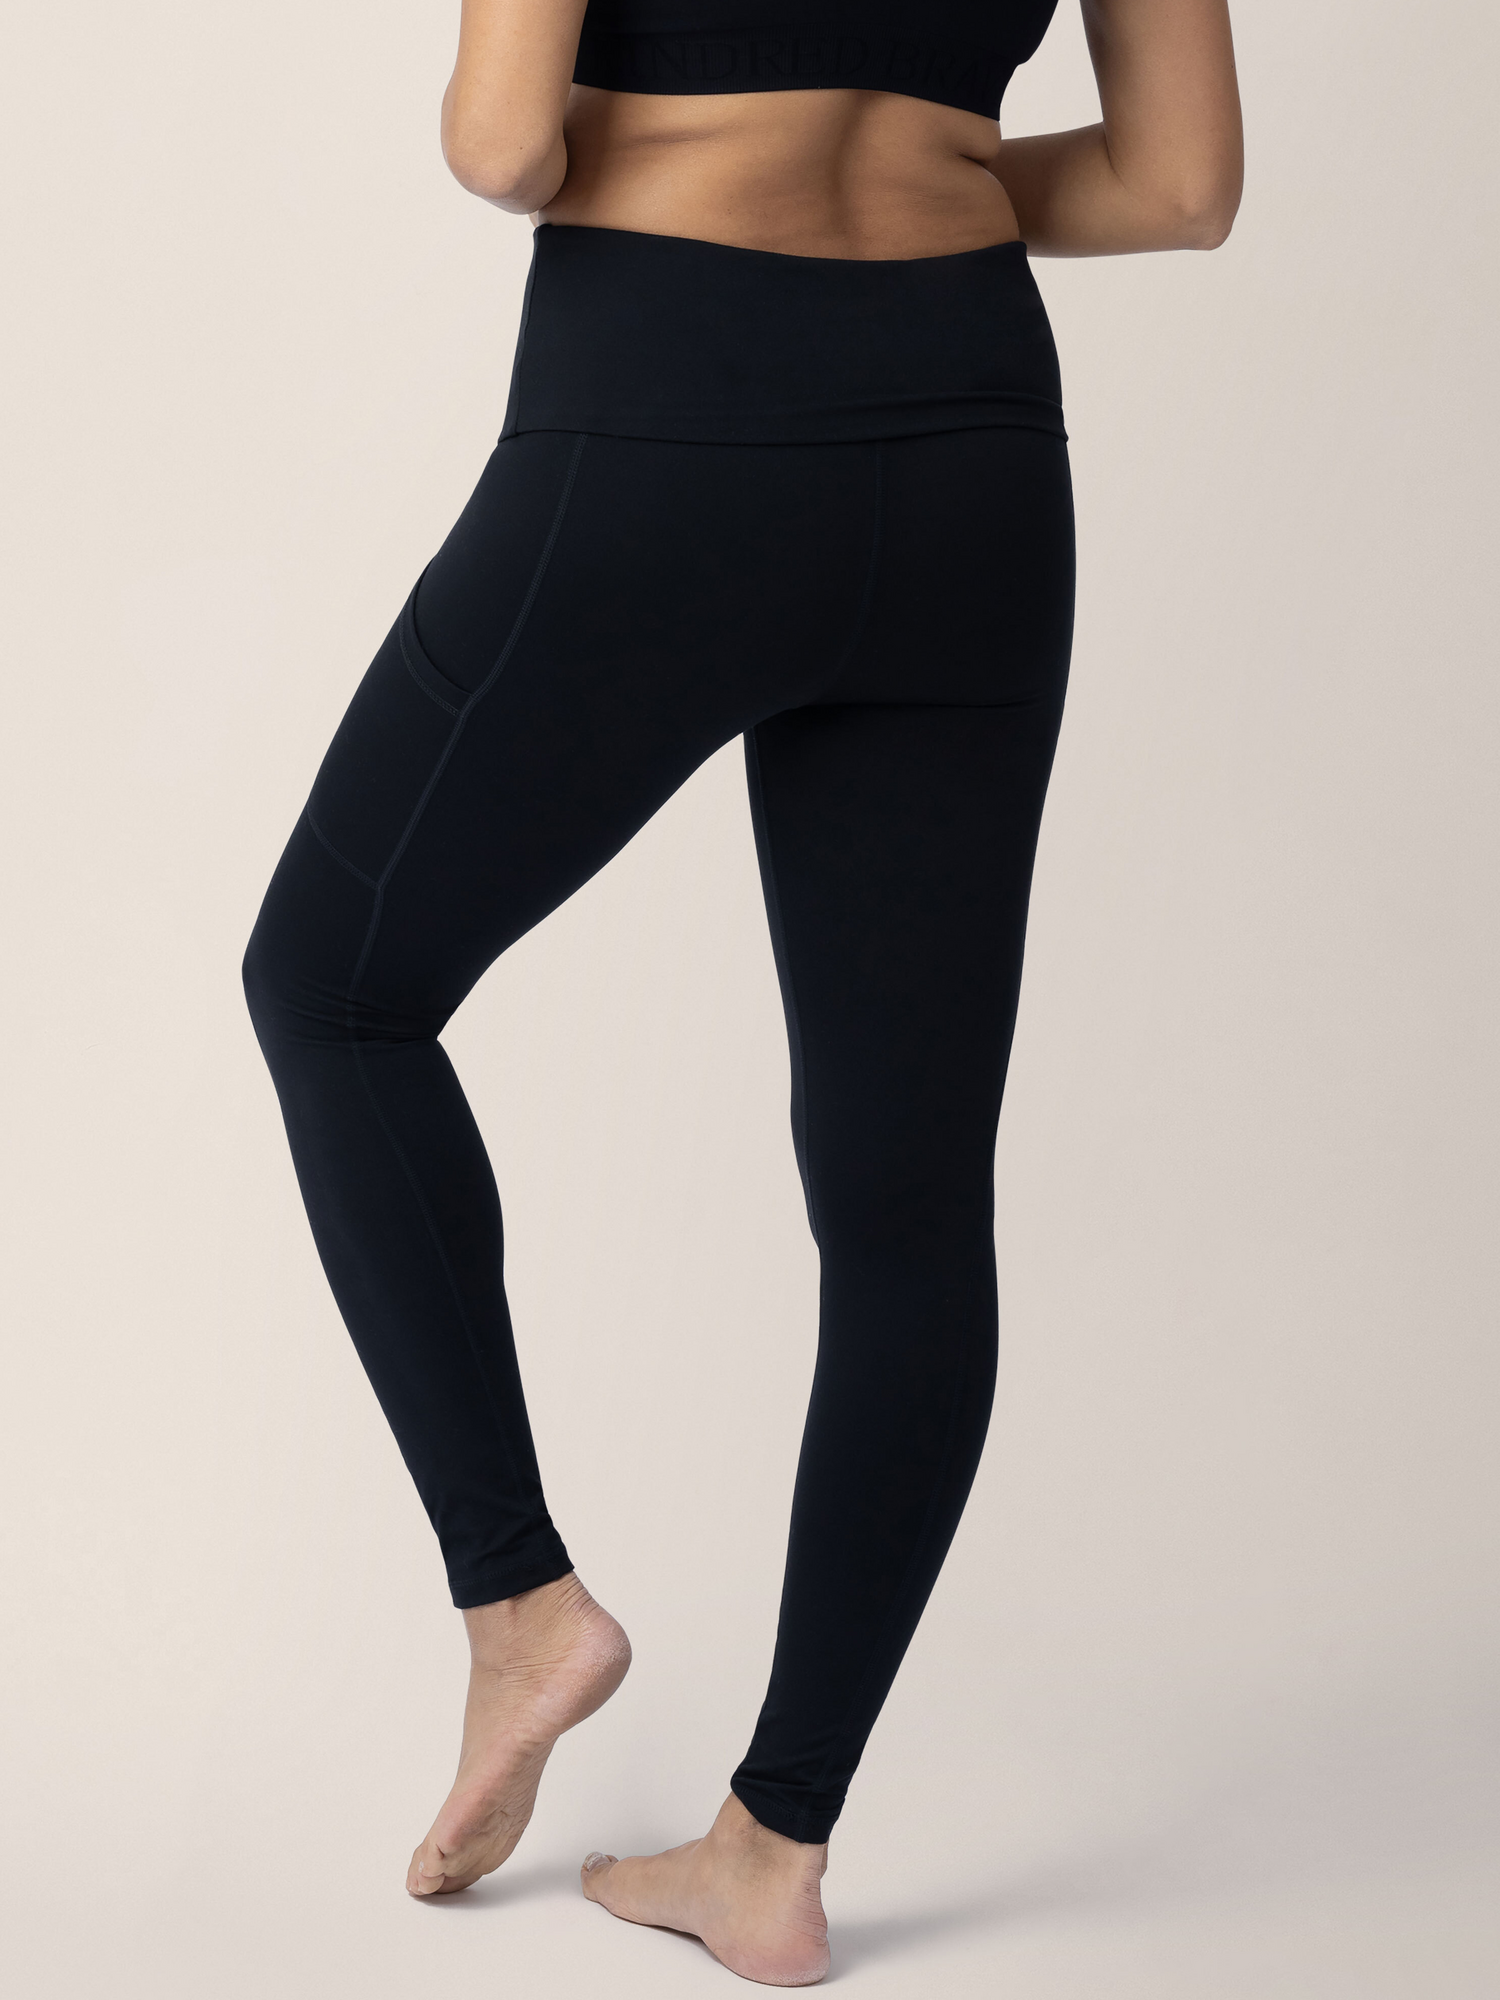 Back of a model wearing the Louisa Maternity & Postpartum Legging in Black with pockets.